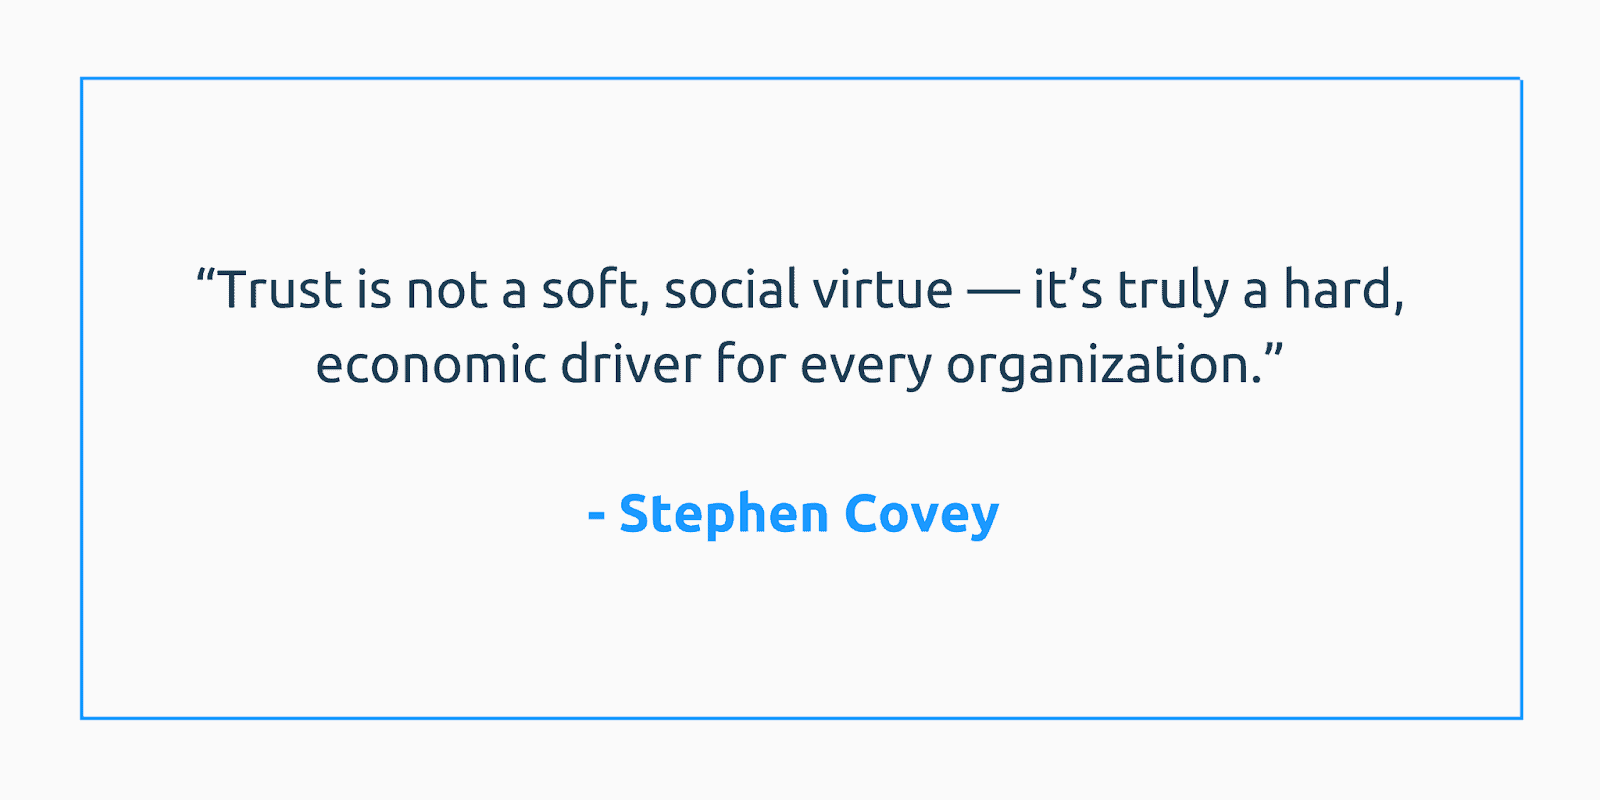 “Trust is not a soft, social virtue — It’s truly a hard, economic driver for every organization.” - Stephen Covey